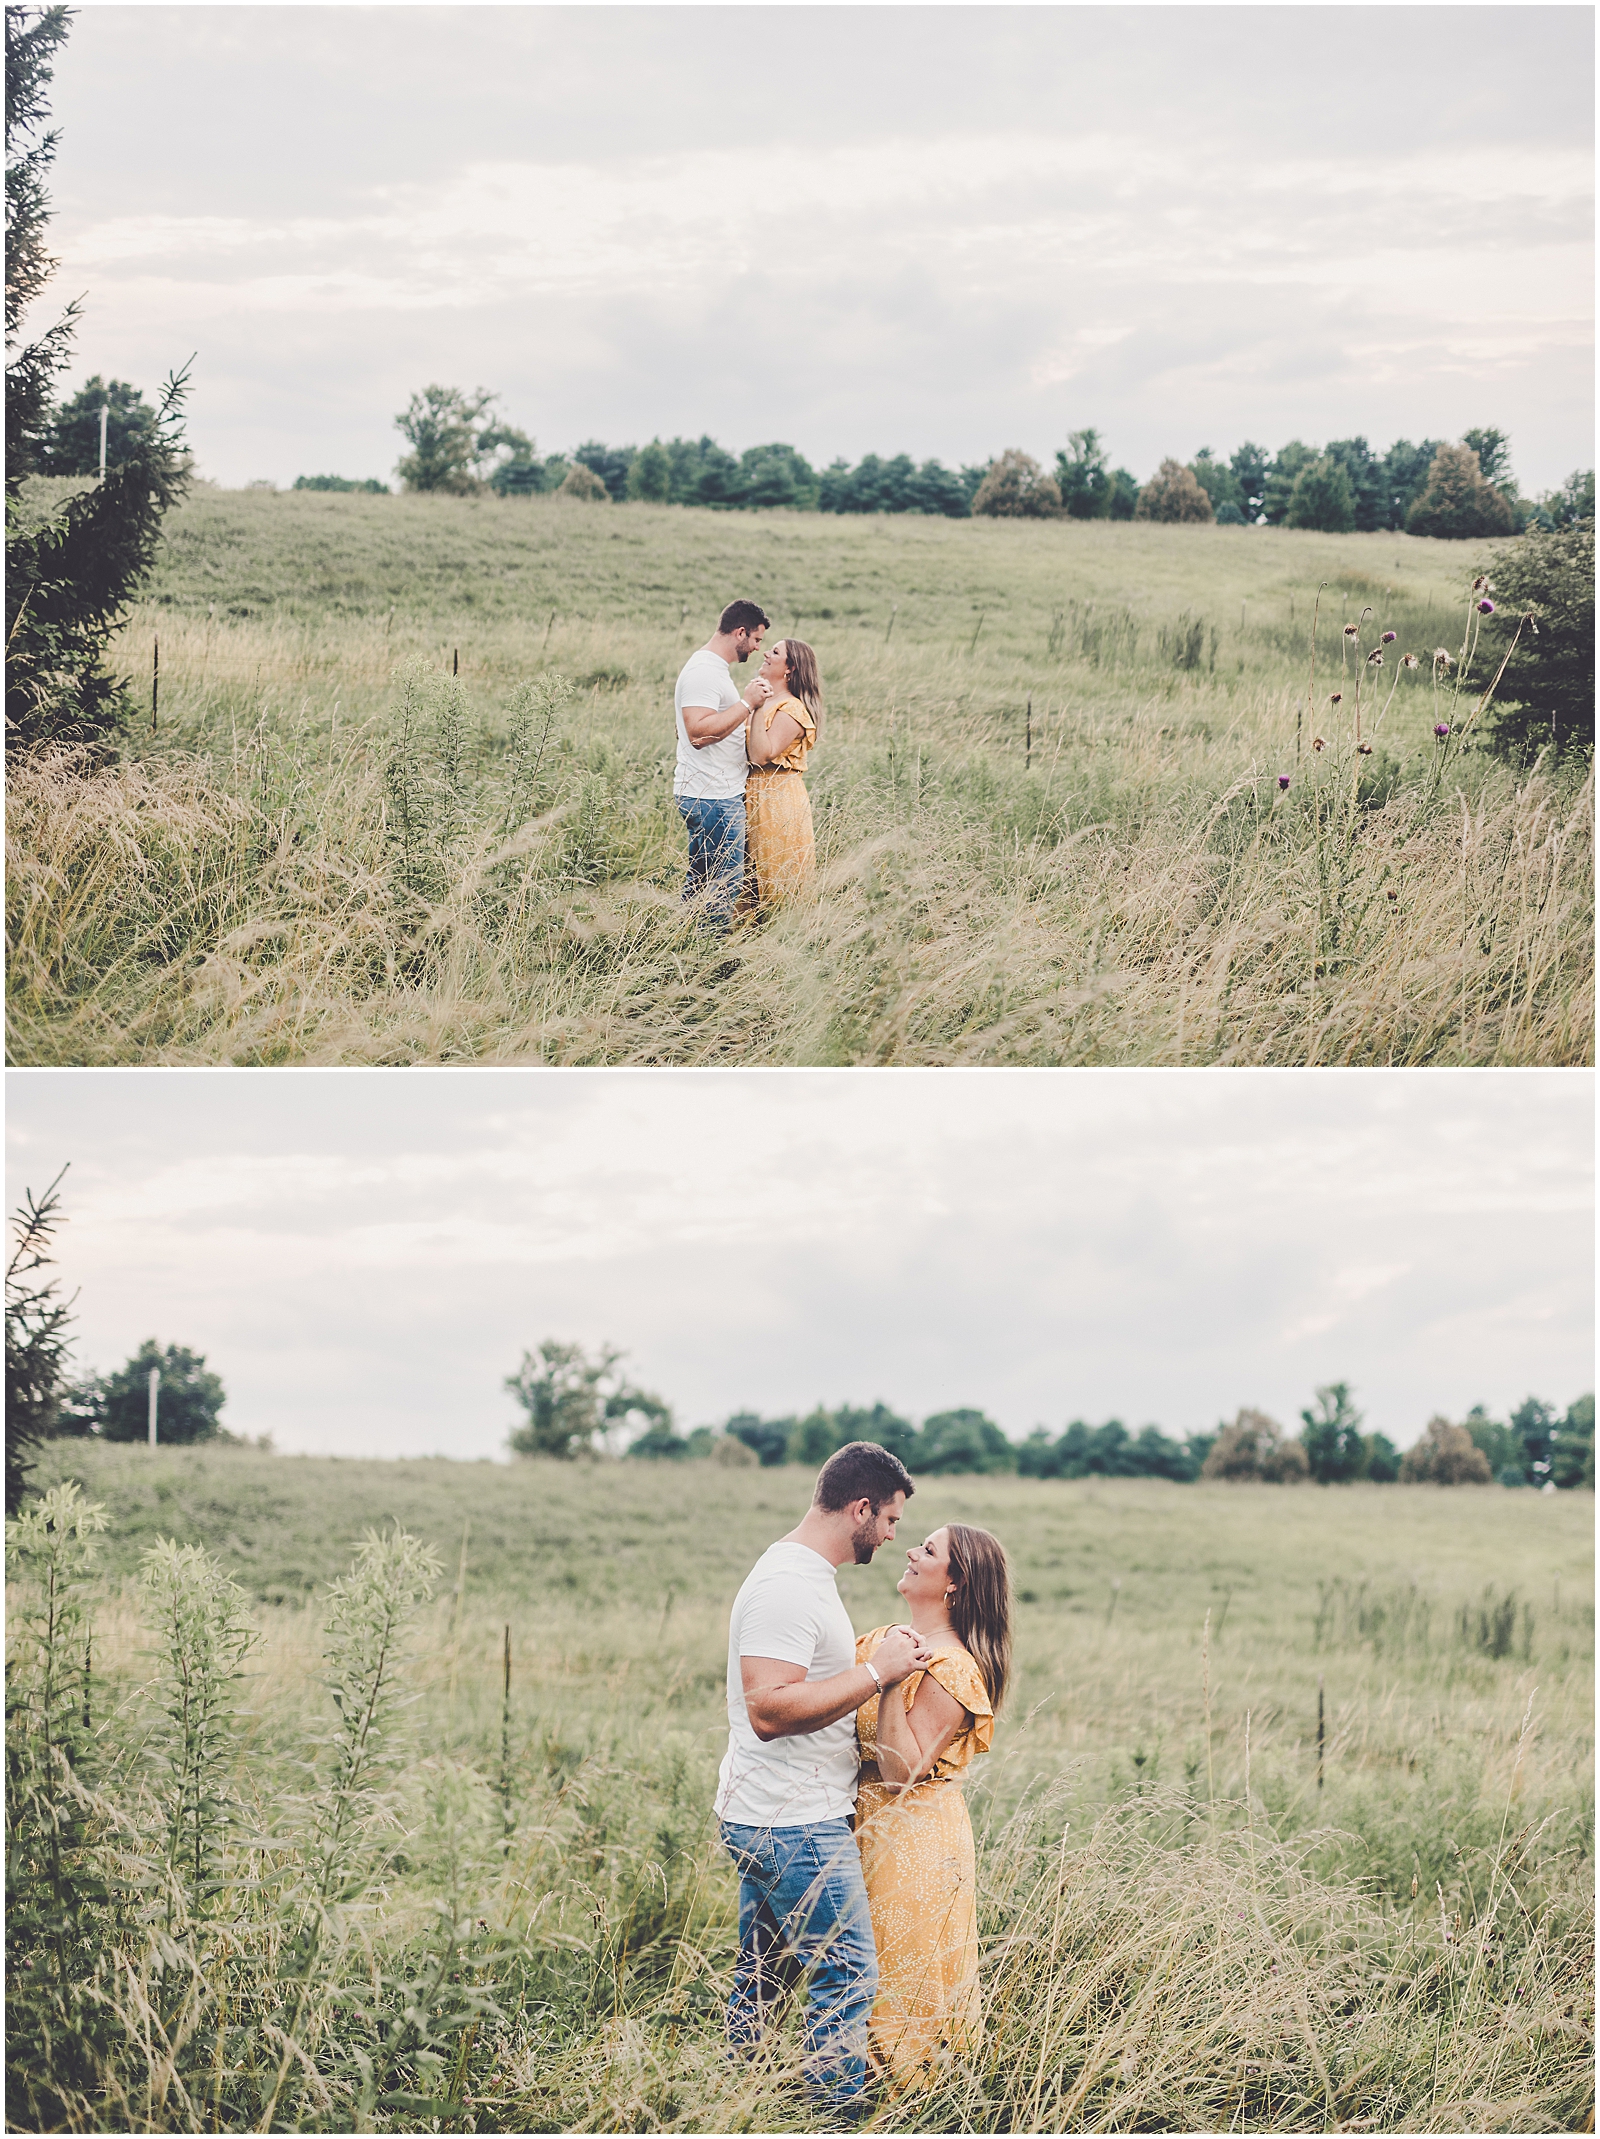 Lakyn and James's summer anniversary session in Alexander, IL with Chicagoland wedding photographer Kara Evans Photographer.